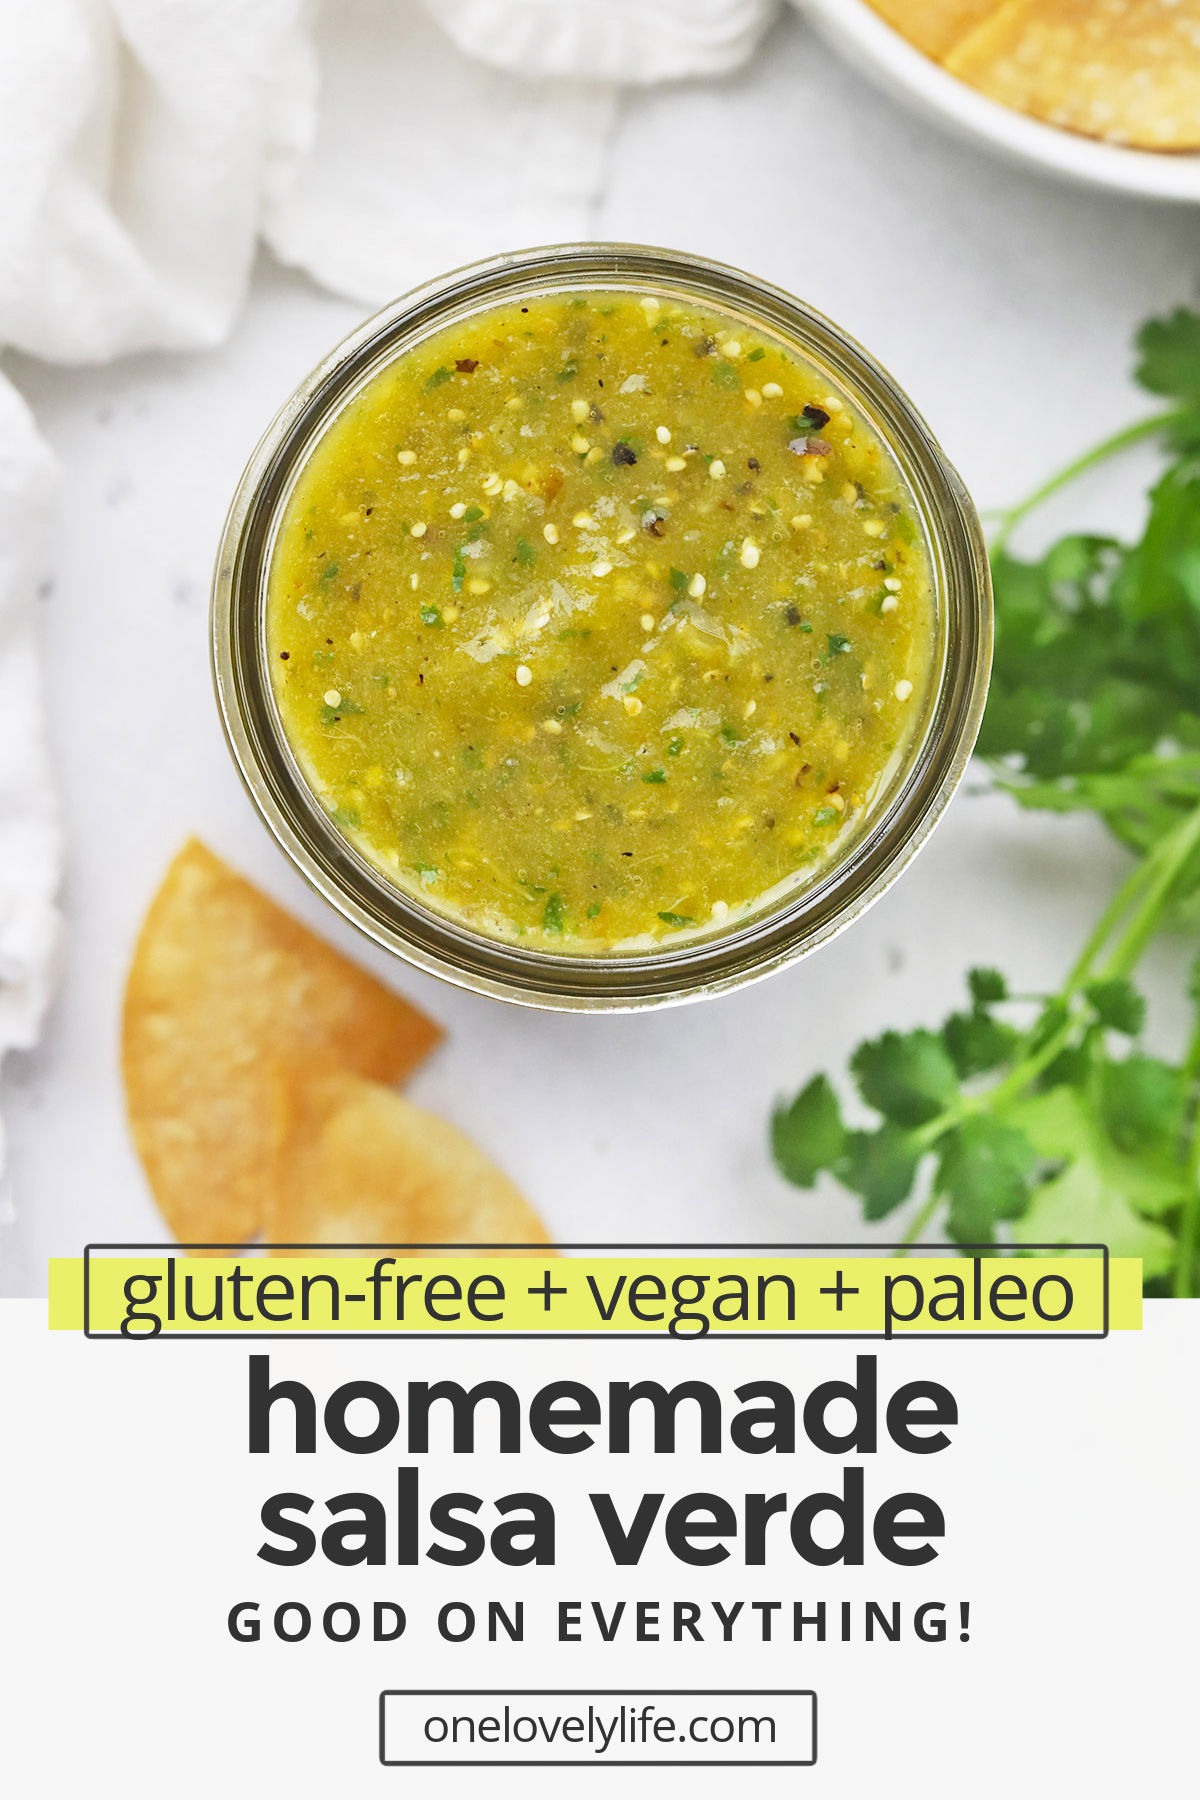 Homemade Salsa Verde - Made with tomatillos, this fresh green salsa is good on just about anything! Don't miss all our favorite ways to use it below. (Naturally vegan, paleo, and gluten-free) // Green Salsa Recipe // Salsa Verde Recipe // Tomatillo Salsa Recipe // Paleo Salsa // Vegan Salsa // Healthy Dip //